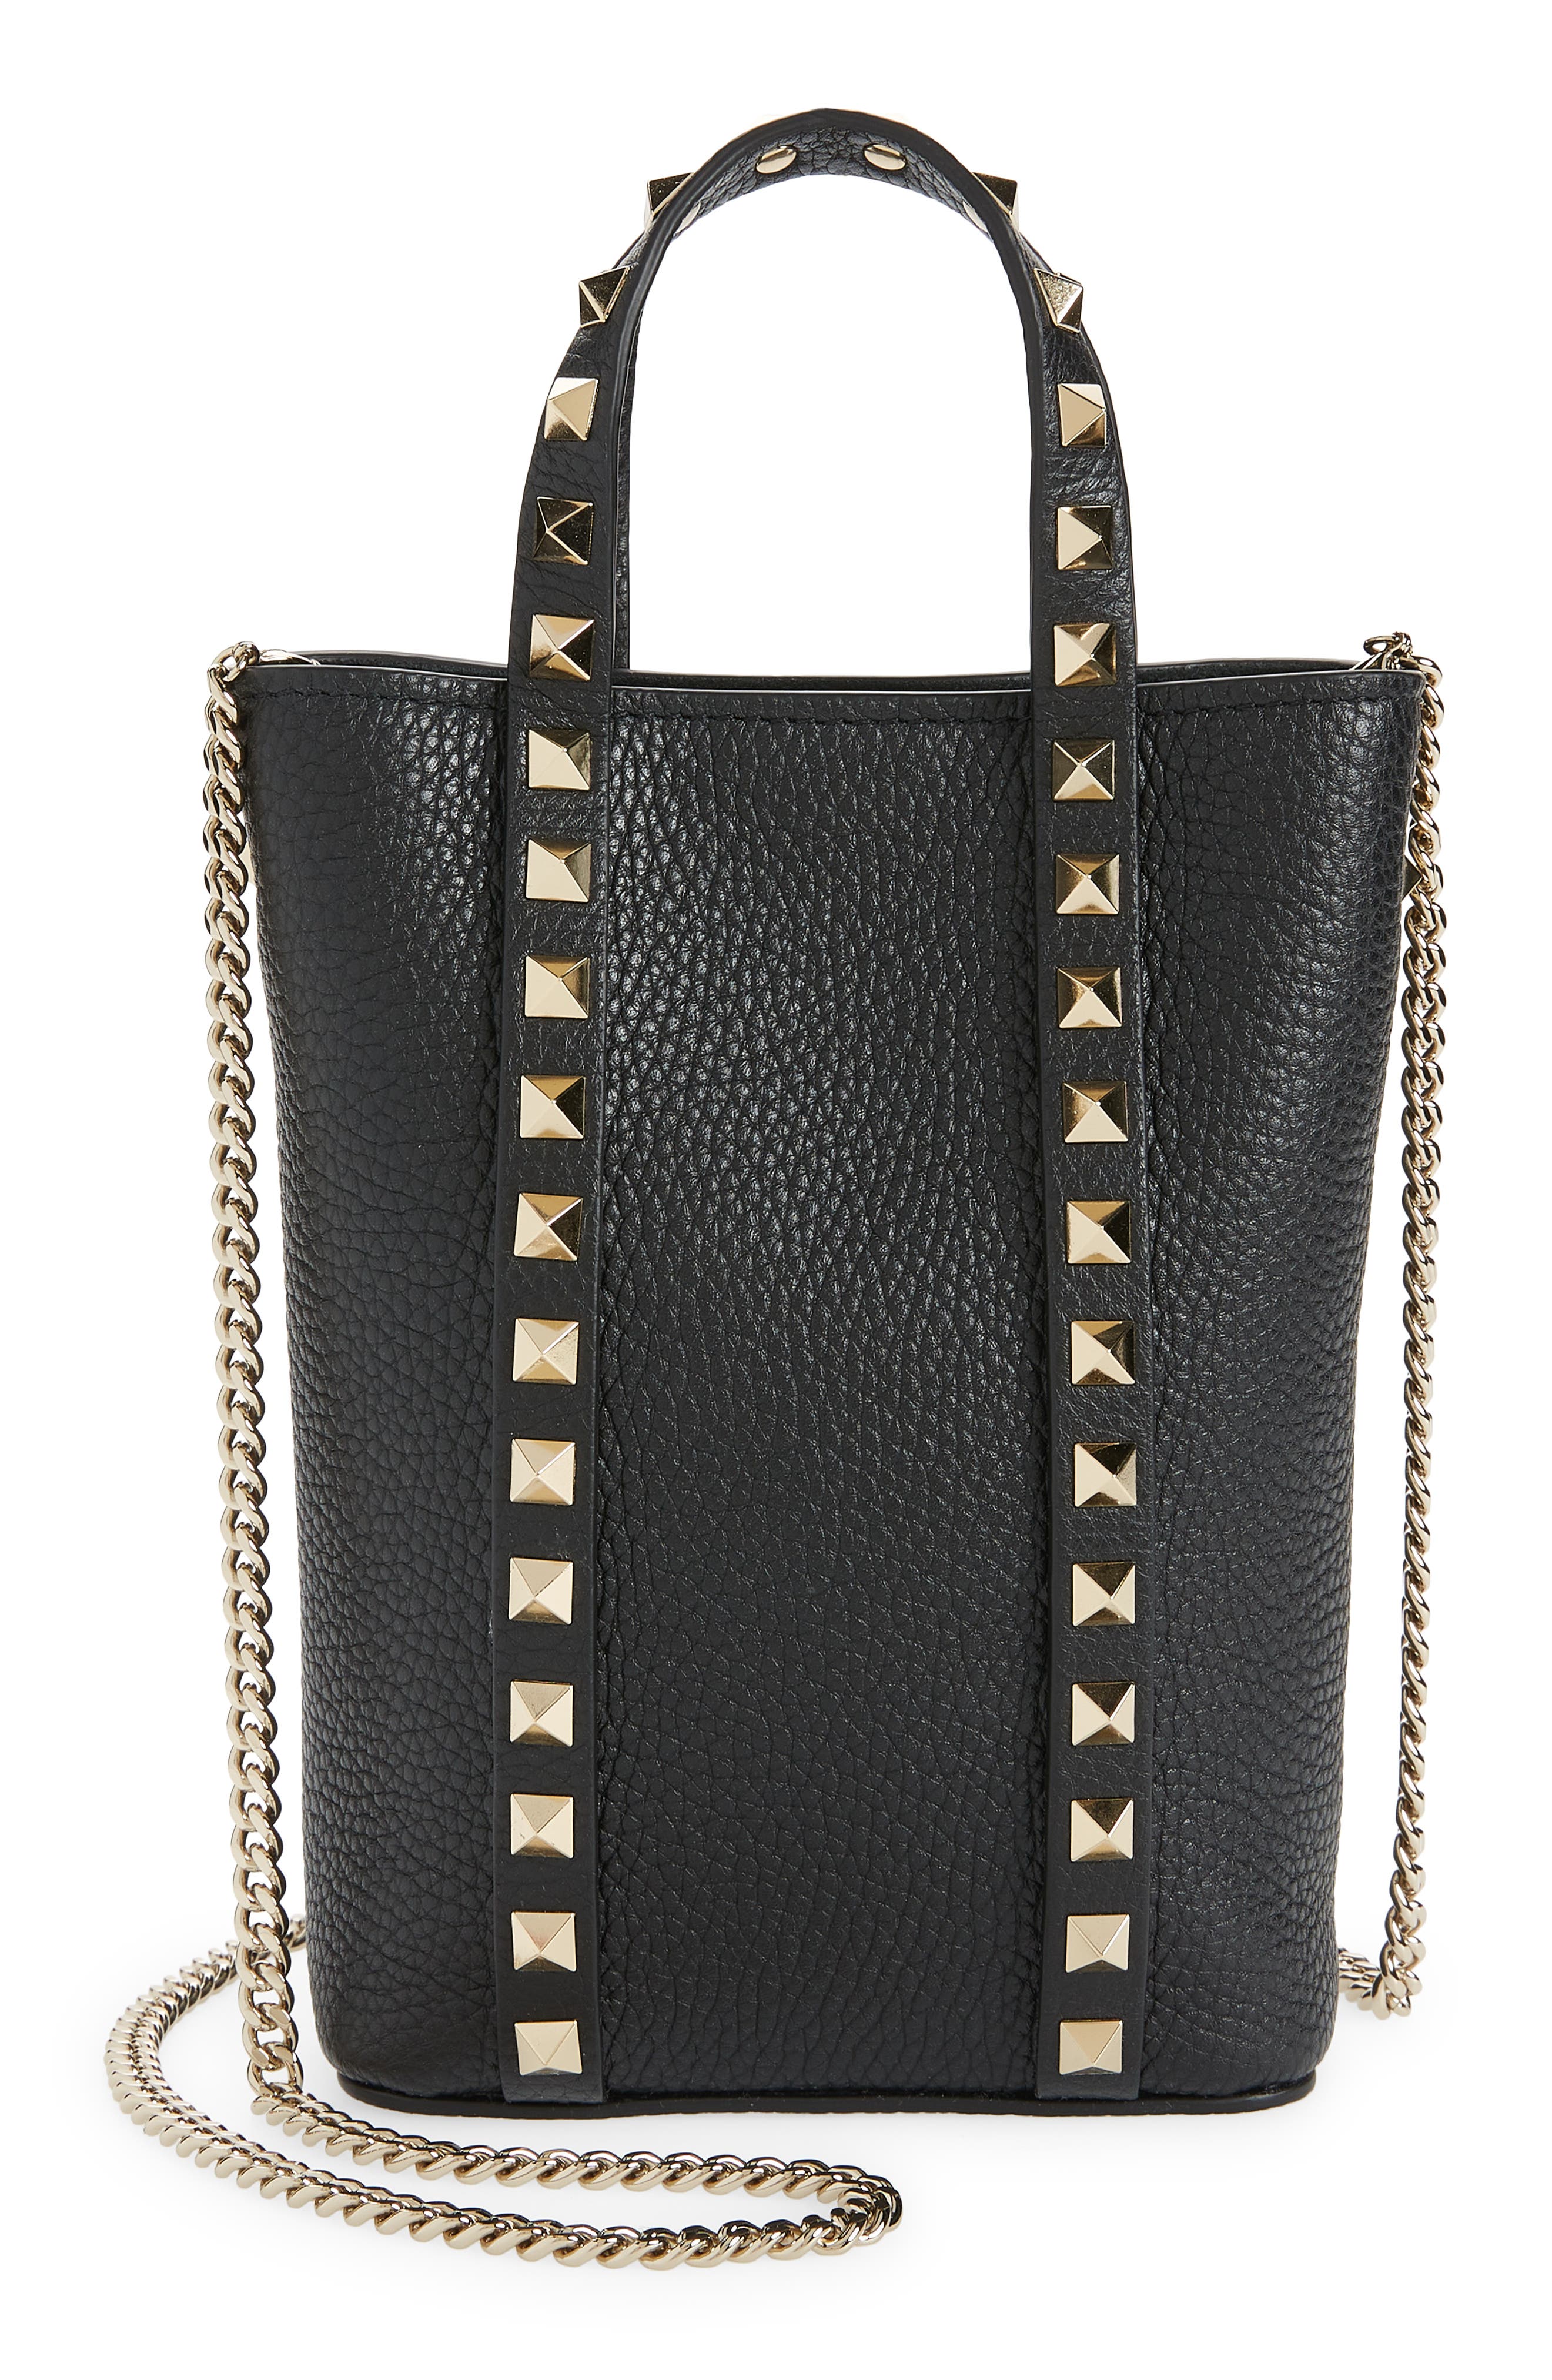 Valentino Rockstud Leather Tote in Nero at Nordstrom